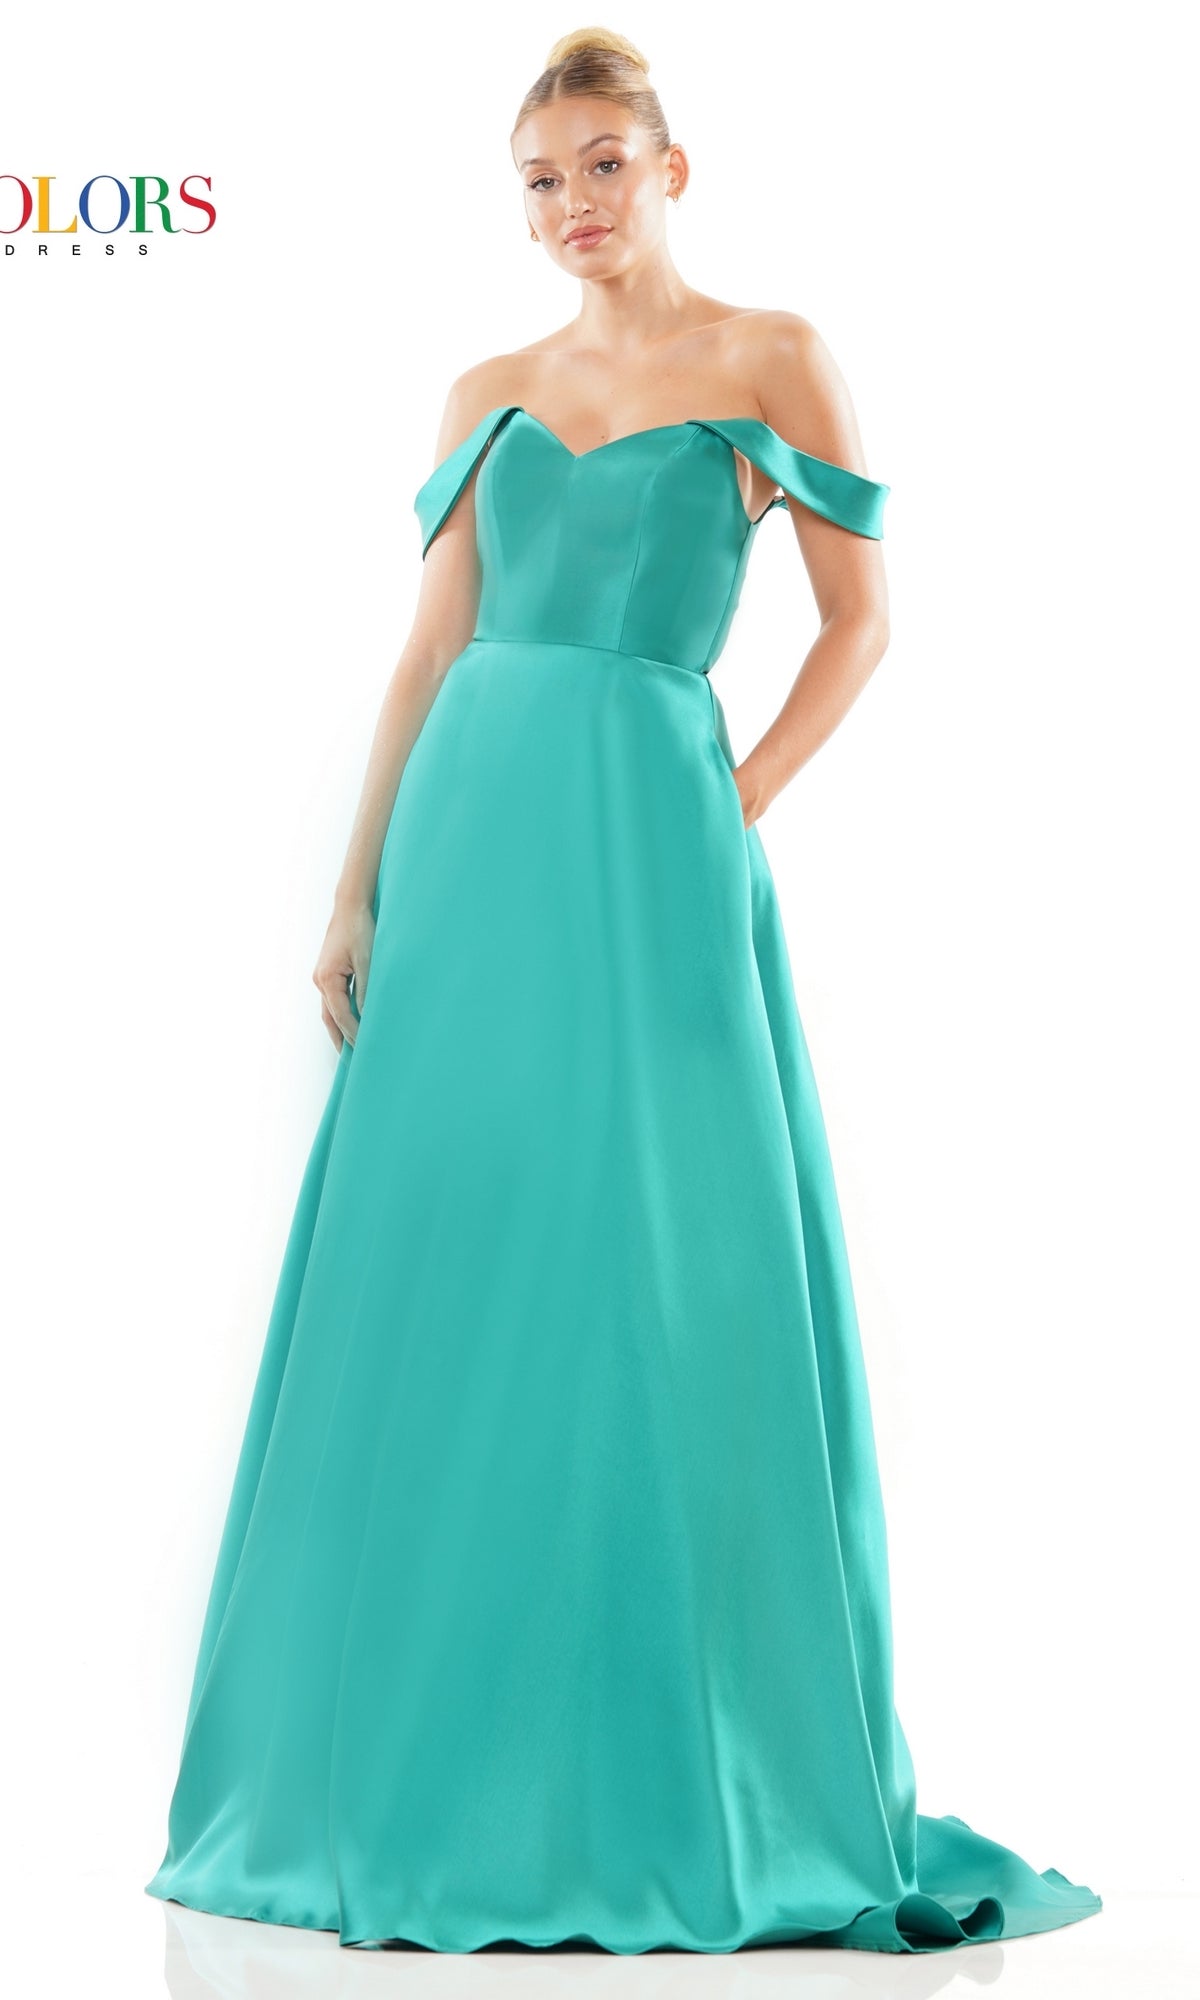 Mikado Classic Ball Gown 3182 by Colors Dress